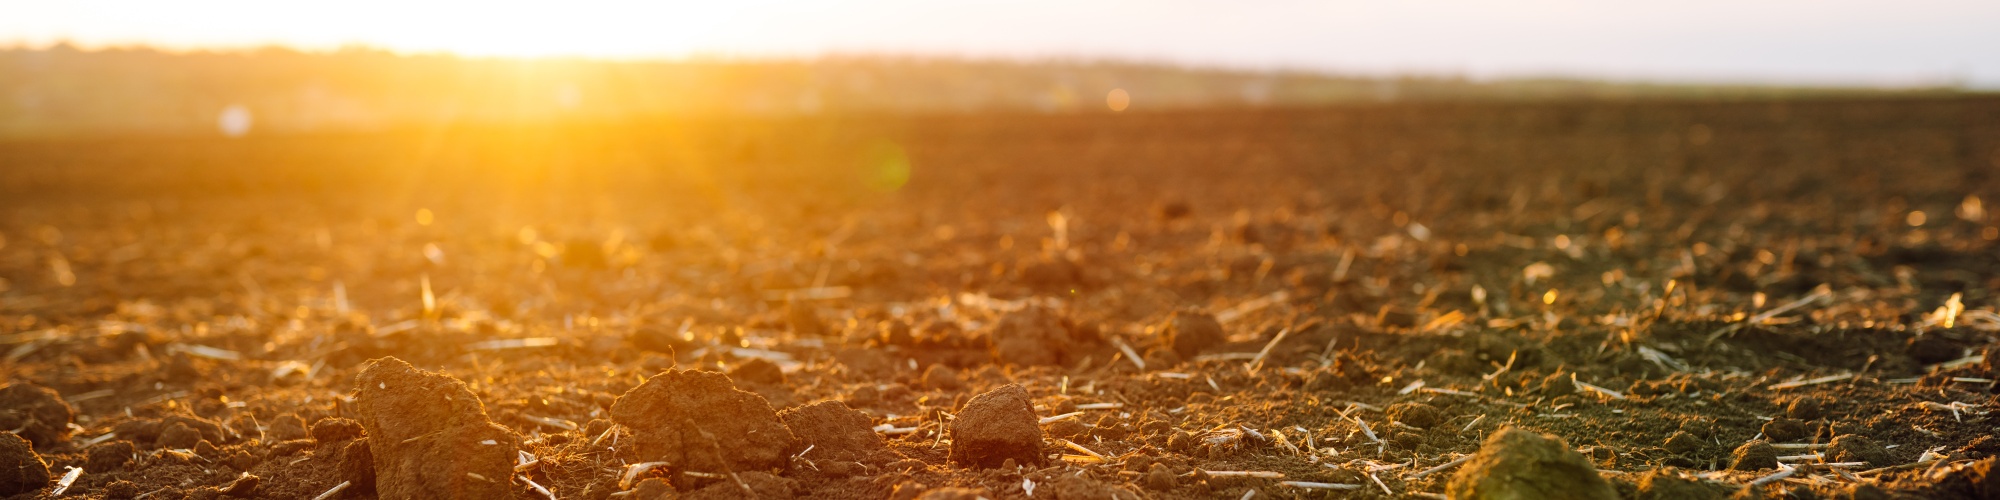 The sun sets over hay-strewn ground. Photo by AdobeStock.